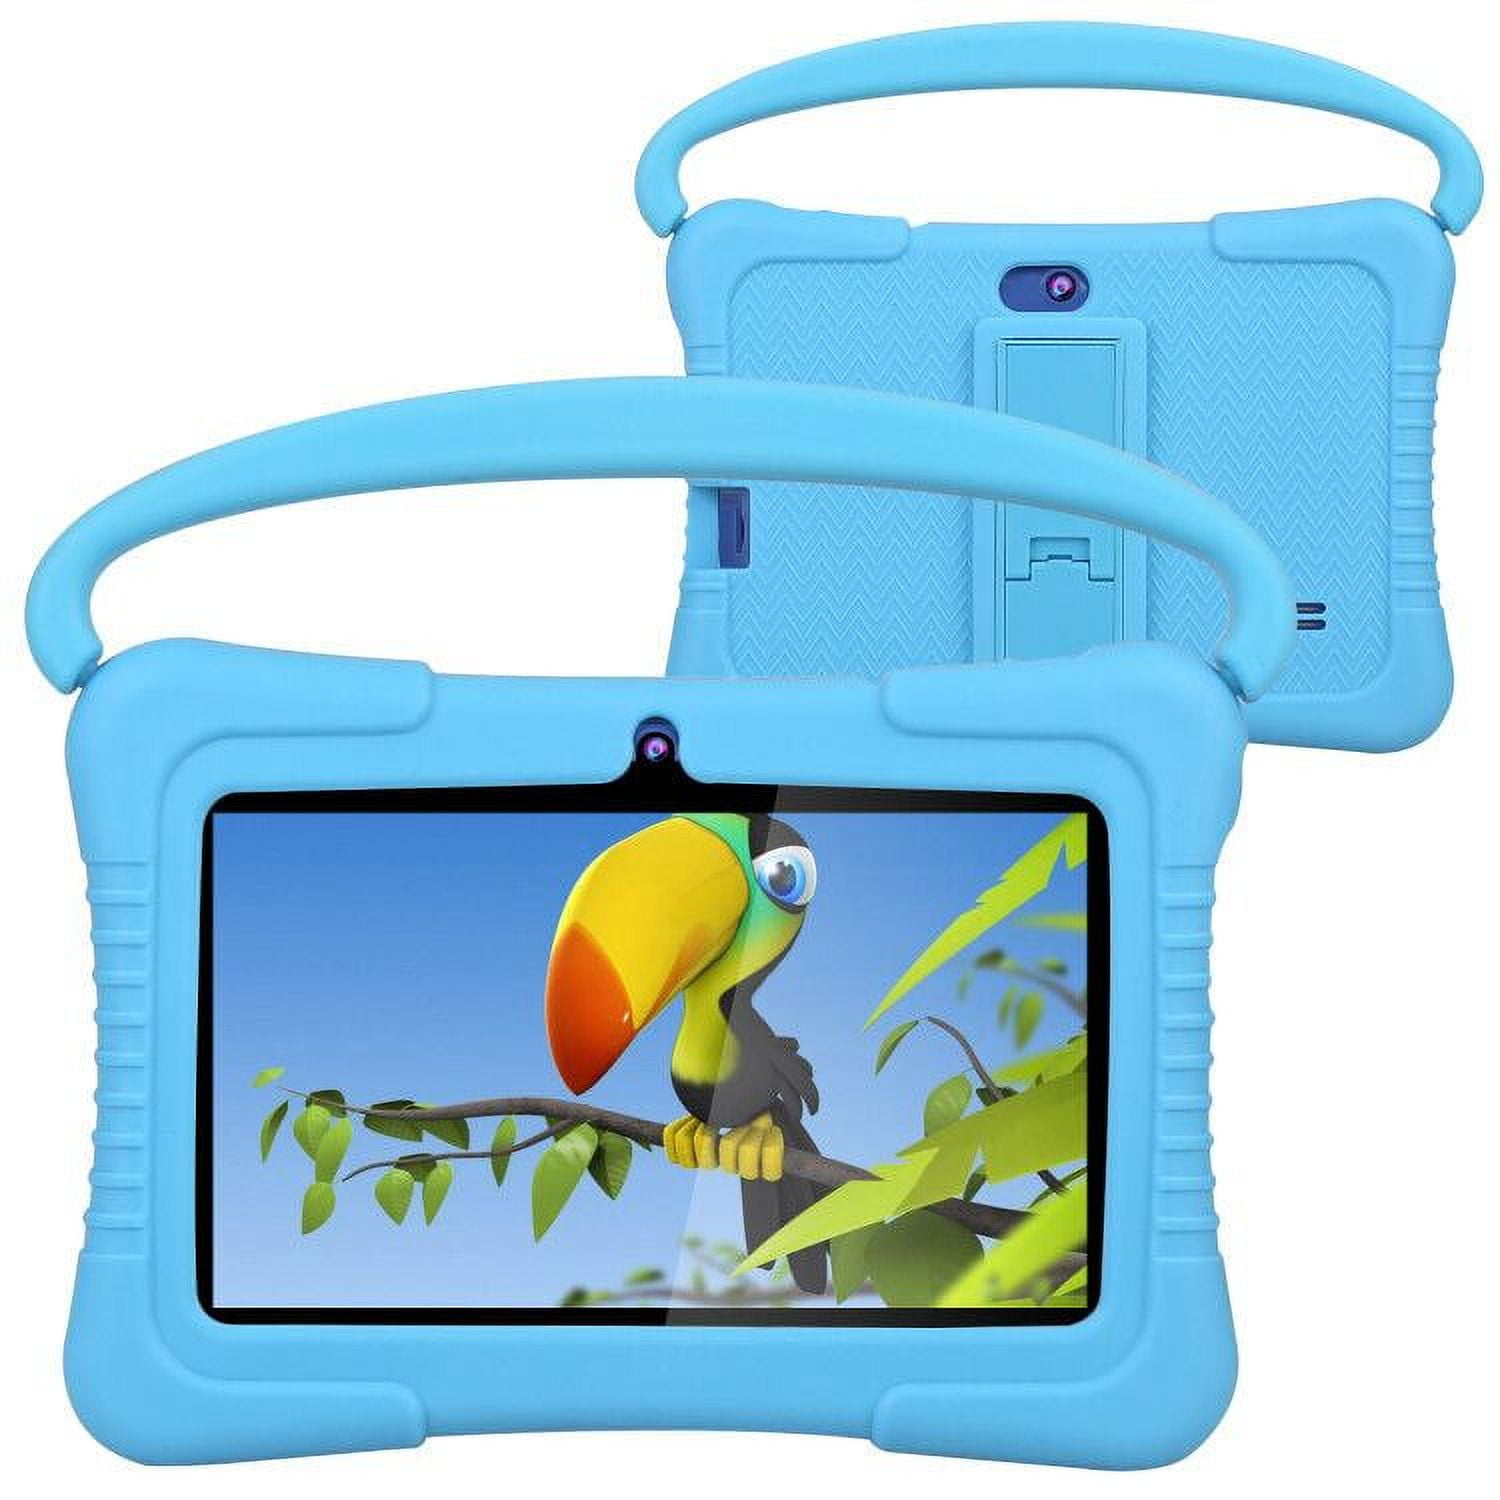 Kids Tablet, 7 Inch Android 10 Tablet for Kids, 2GB +32GB, Kid Mode Pre ...